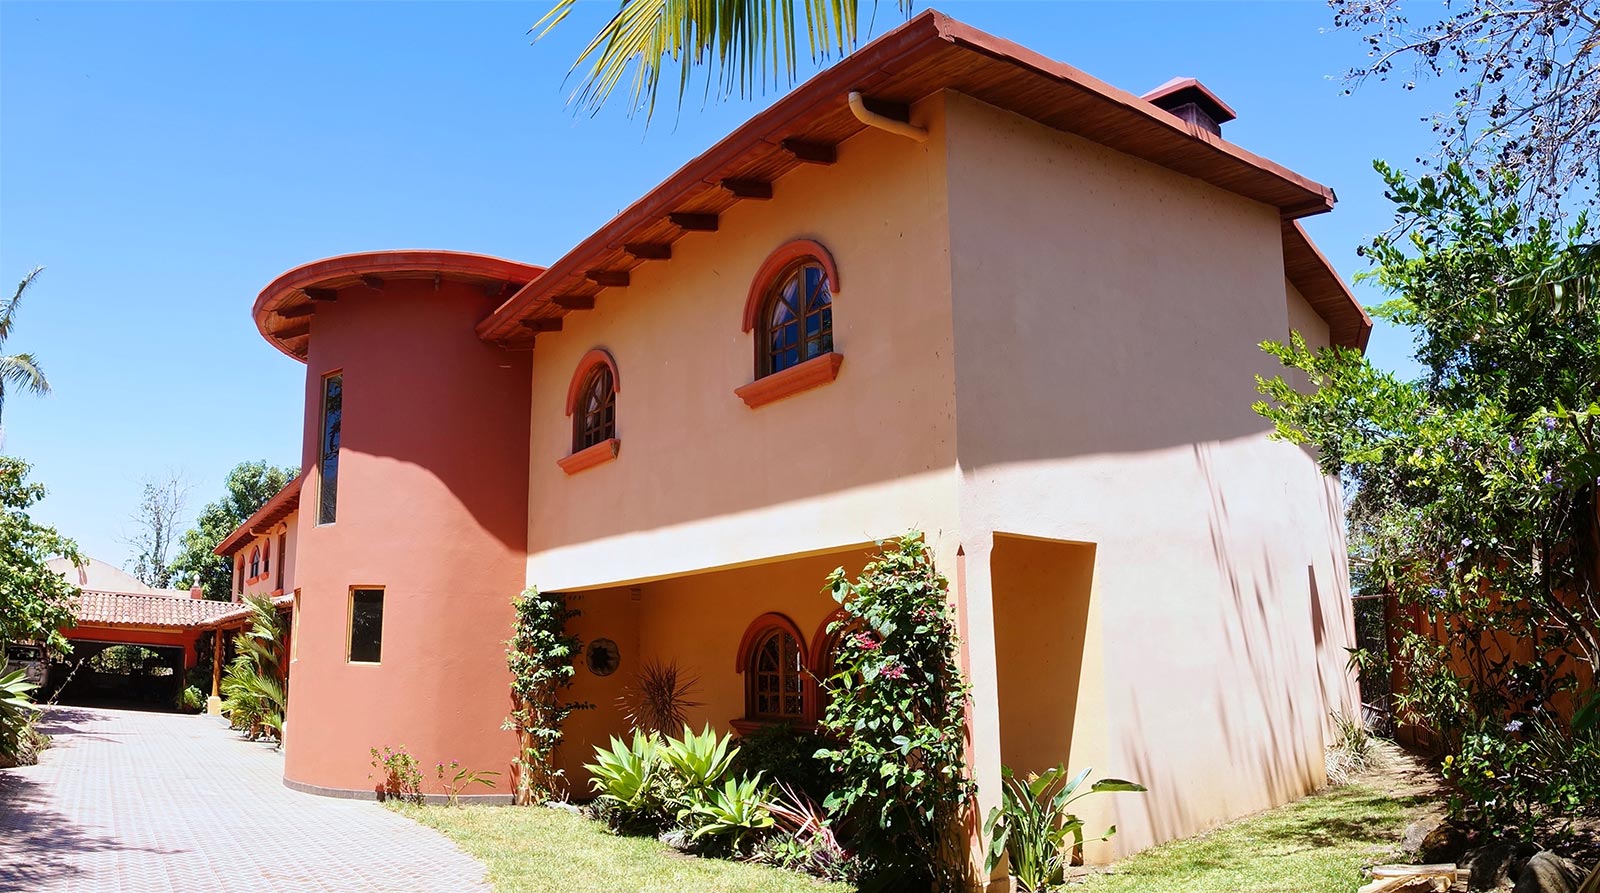 Steal of Deal in this Santa Ana Income Producing Estate Home for sale, Ideal Setup for Airbnb